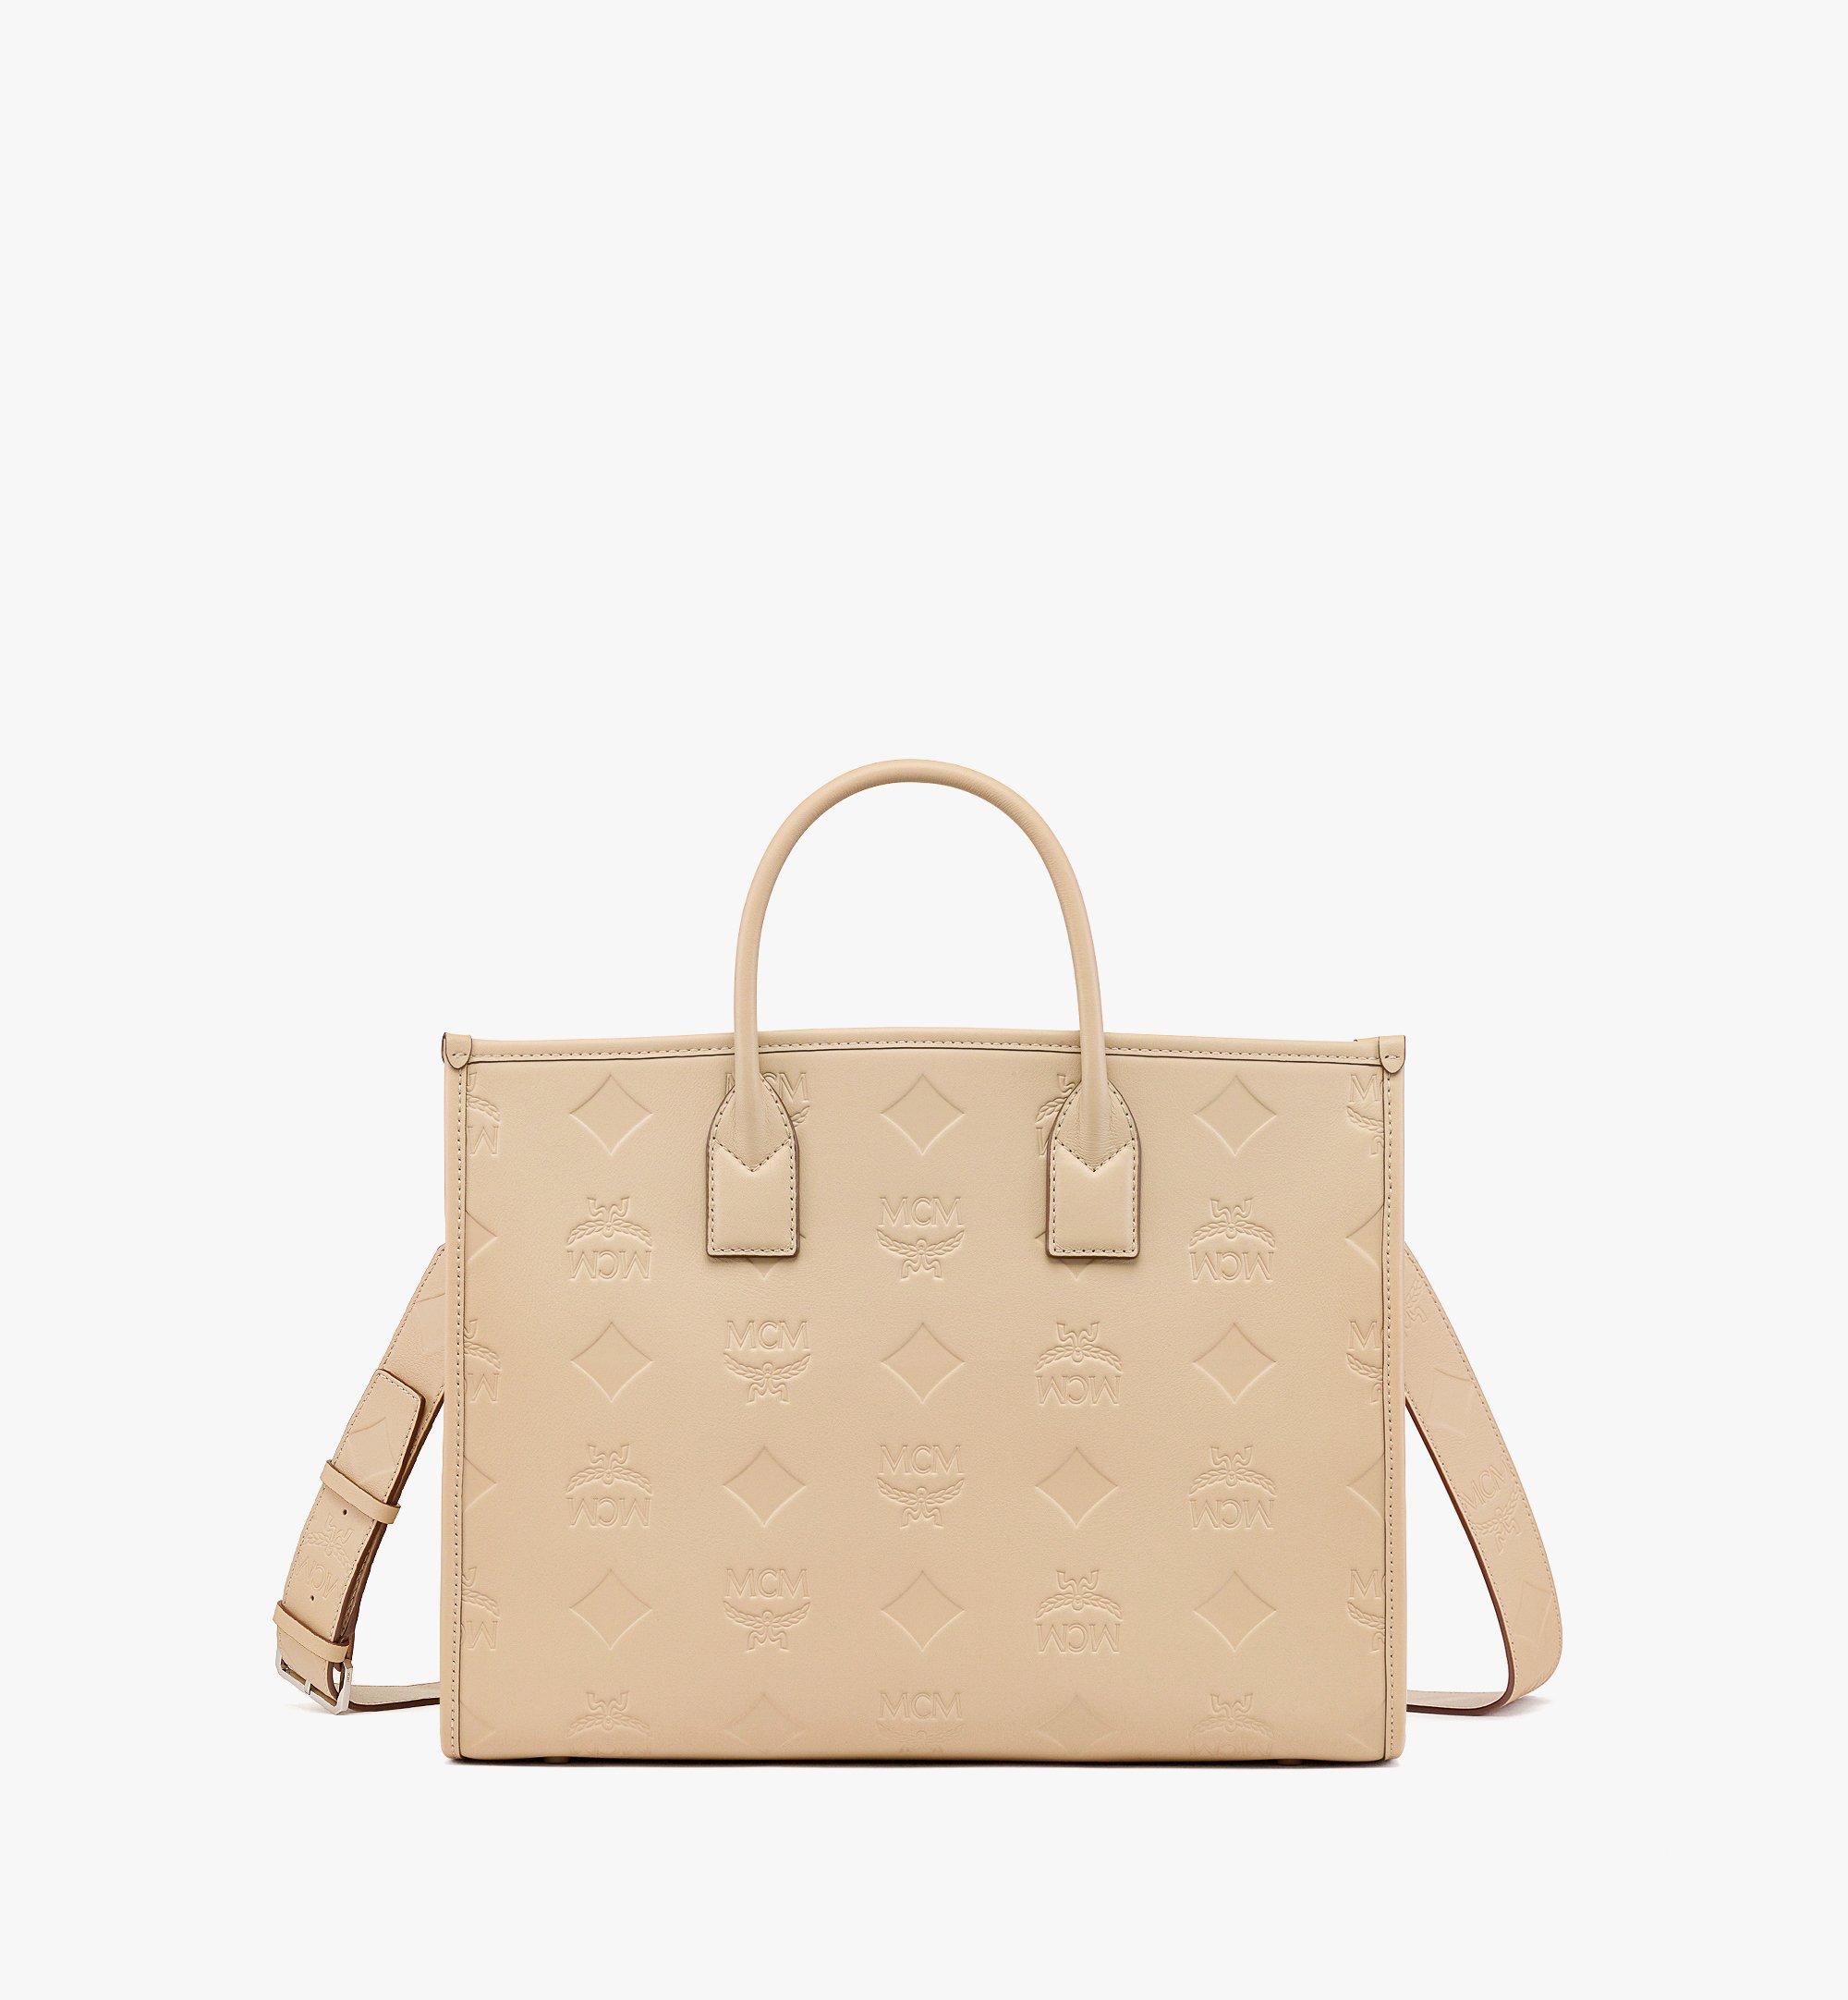 MÃ¼nchen Tote in Maxi Monogram Leather